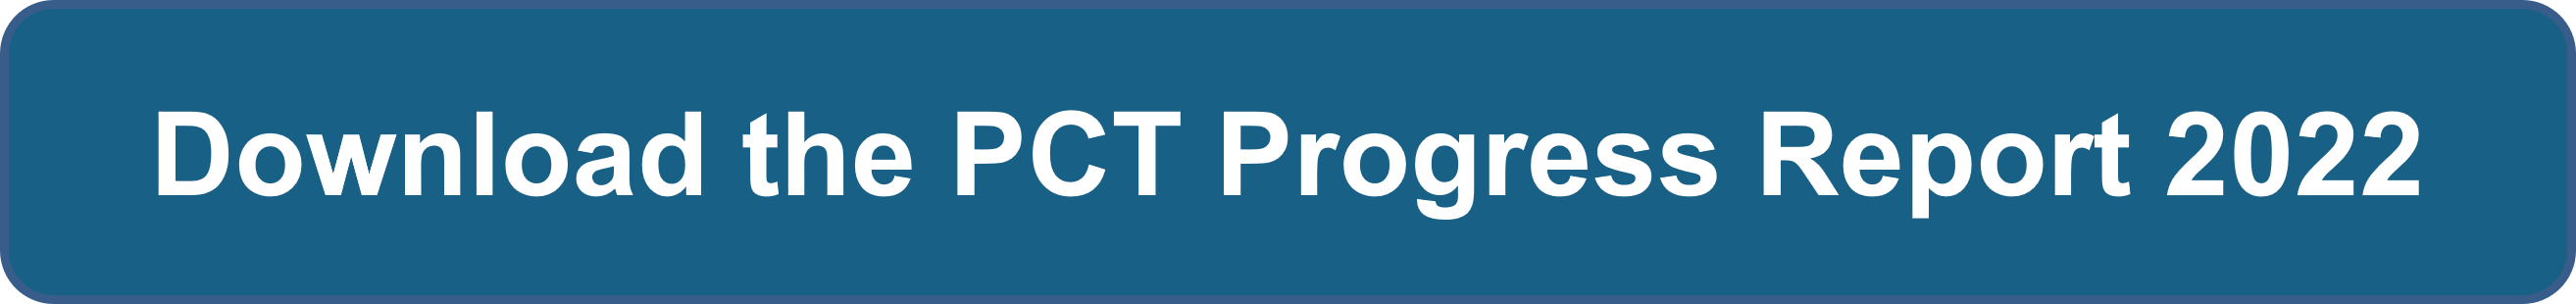 Click here to download the PCT Progress Report 2022